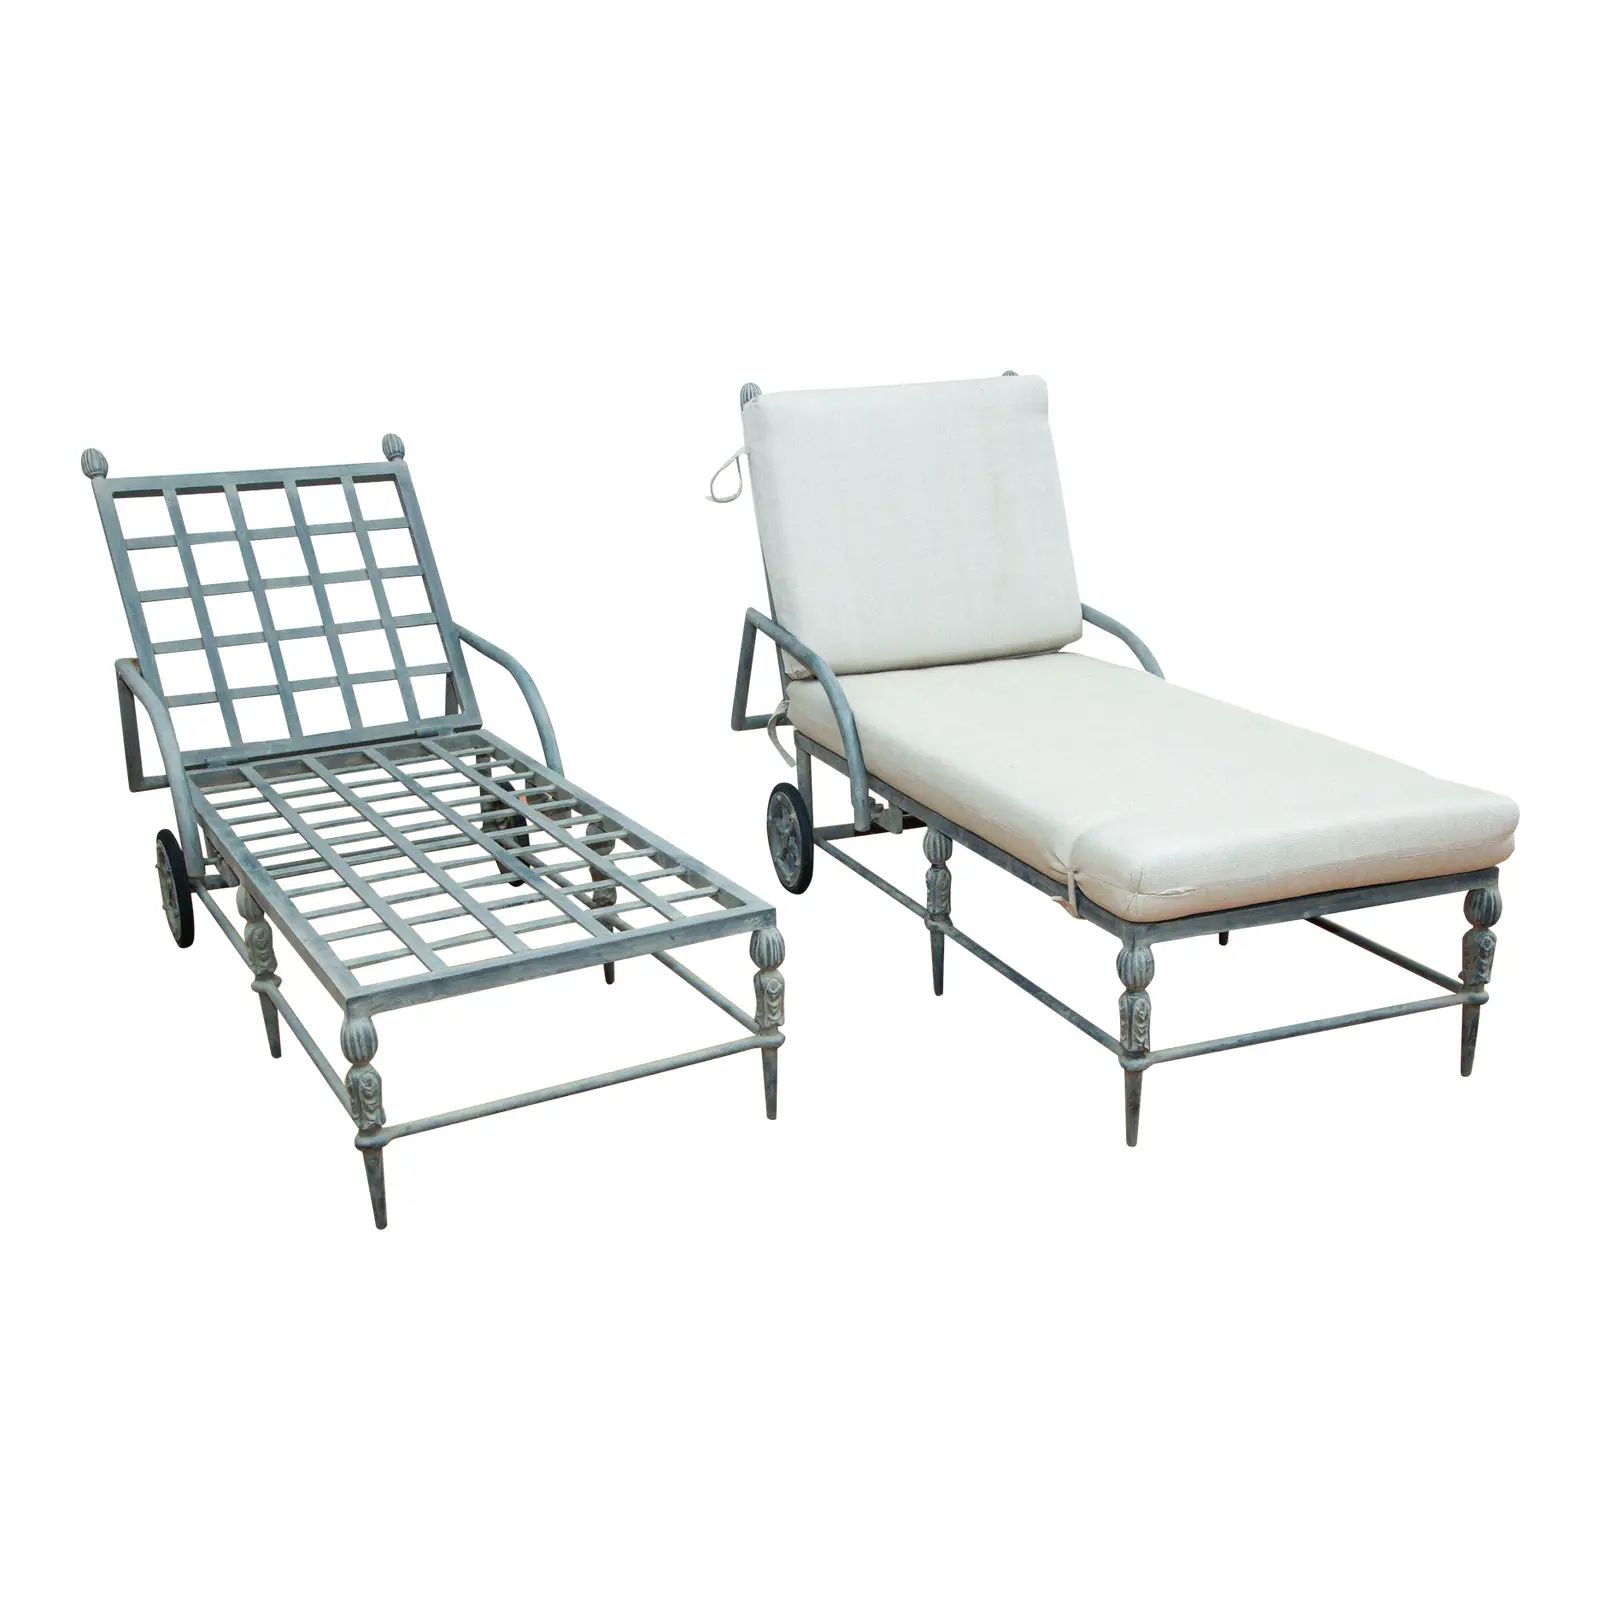 Michael Taylor "Montecito" Outdoor Garden Chaise Lounge Set of Two Bronze Patina | Chairish